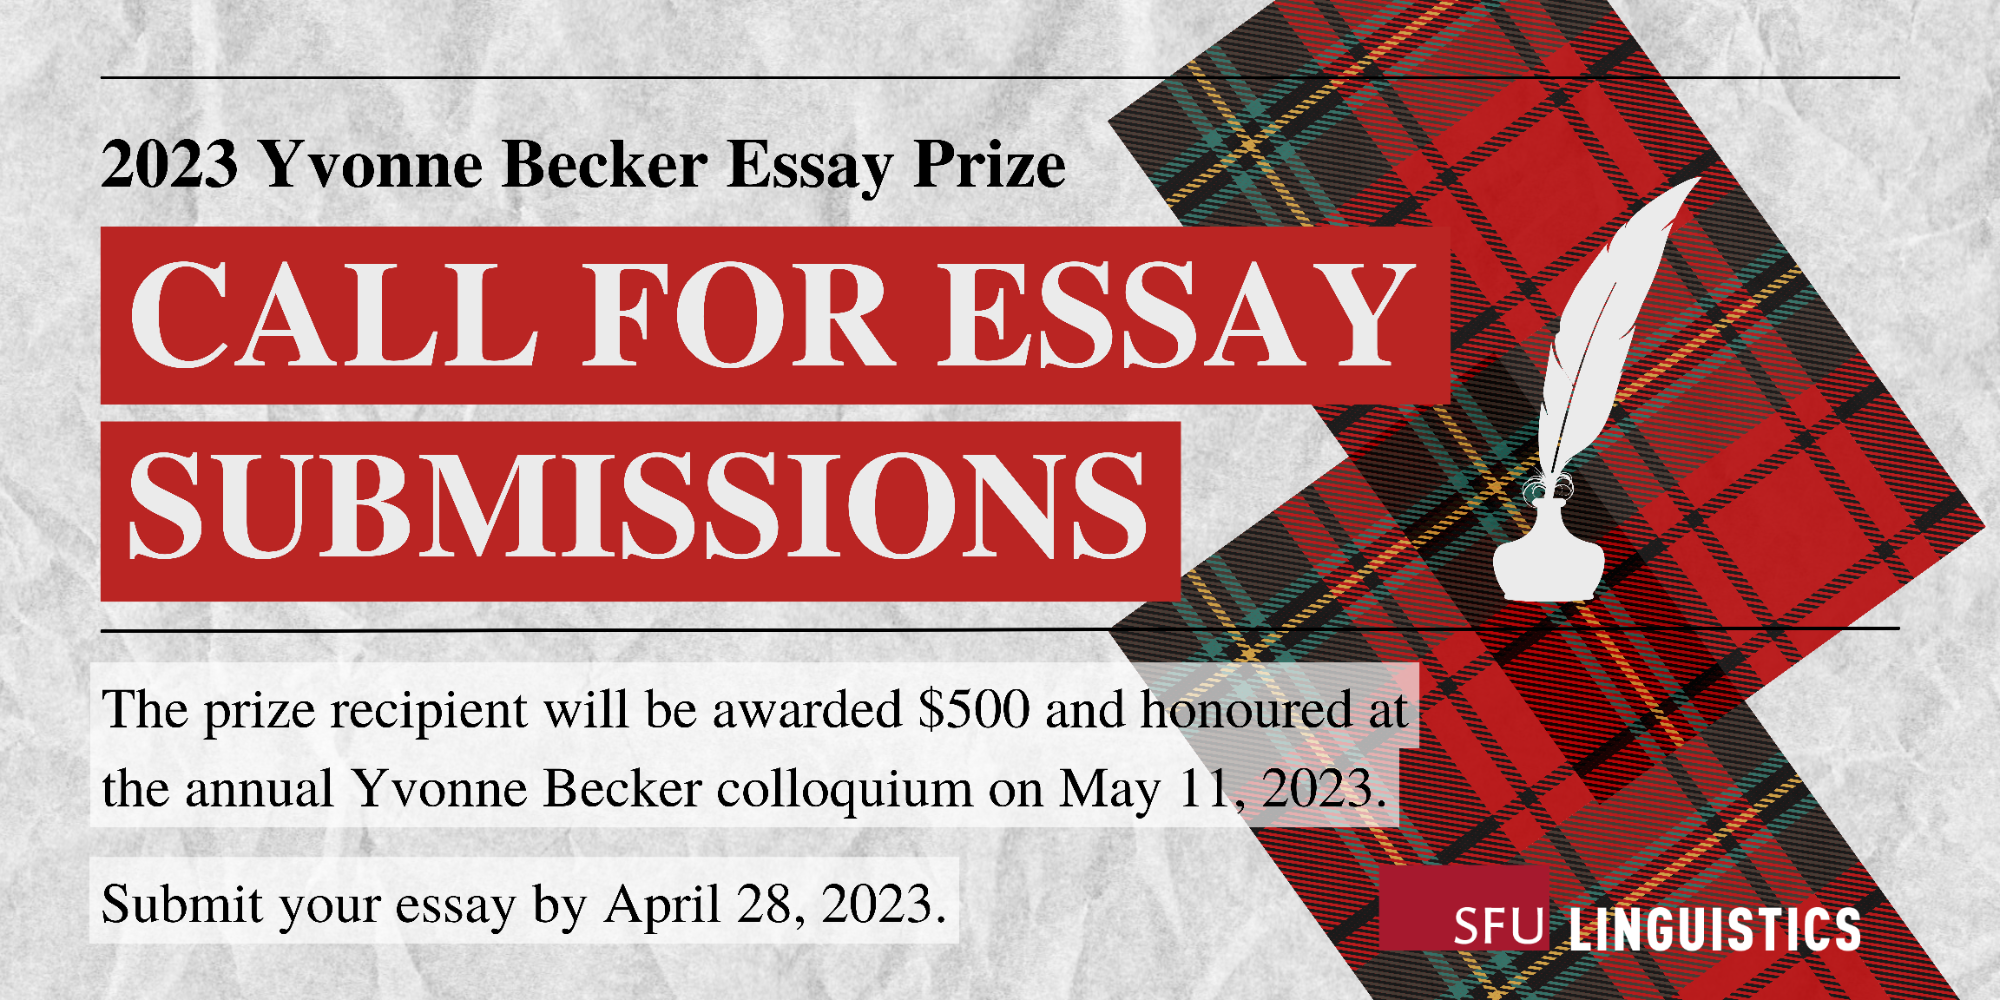 A grey paper-textured background with a red tartan pattern and a white illustration of a quill pen on the right-hand side. From the left, it reads: “2023 Yvonne Becker Essay Prize. Call for Essay Submissions. The prize recipient will be awarded $500 and honoured at the annual Yvonne Becker colloquium on May 11, 2023. Submit your essay by April 28, 2023. On the bottom right is the logo of the Department of Linguistics.